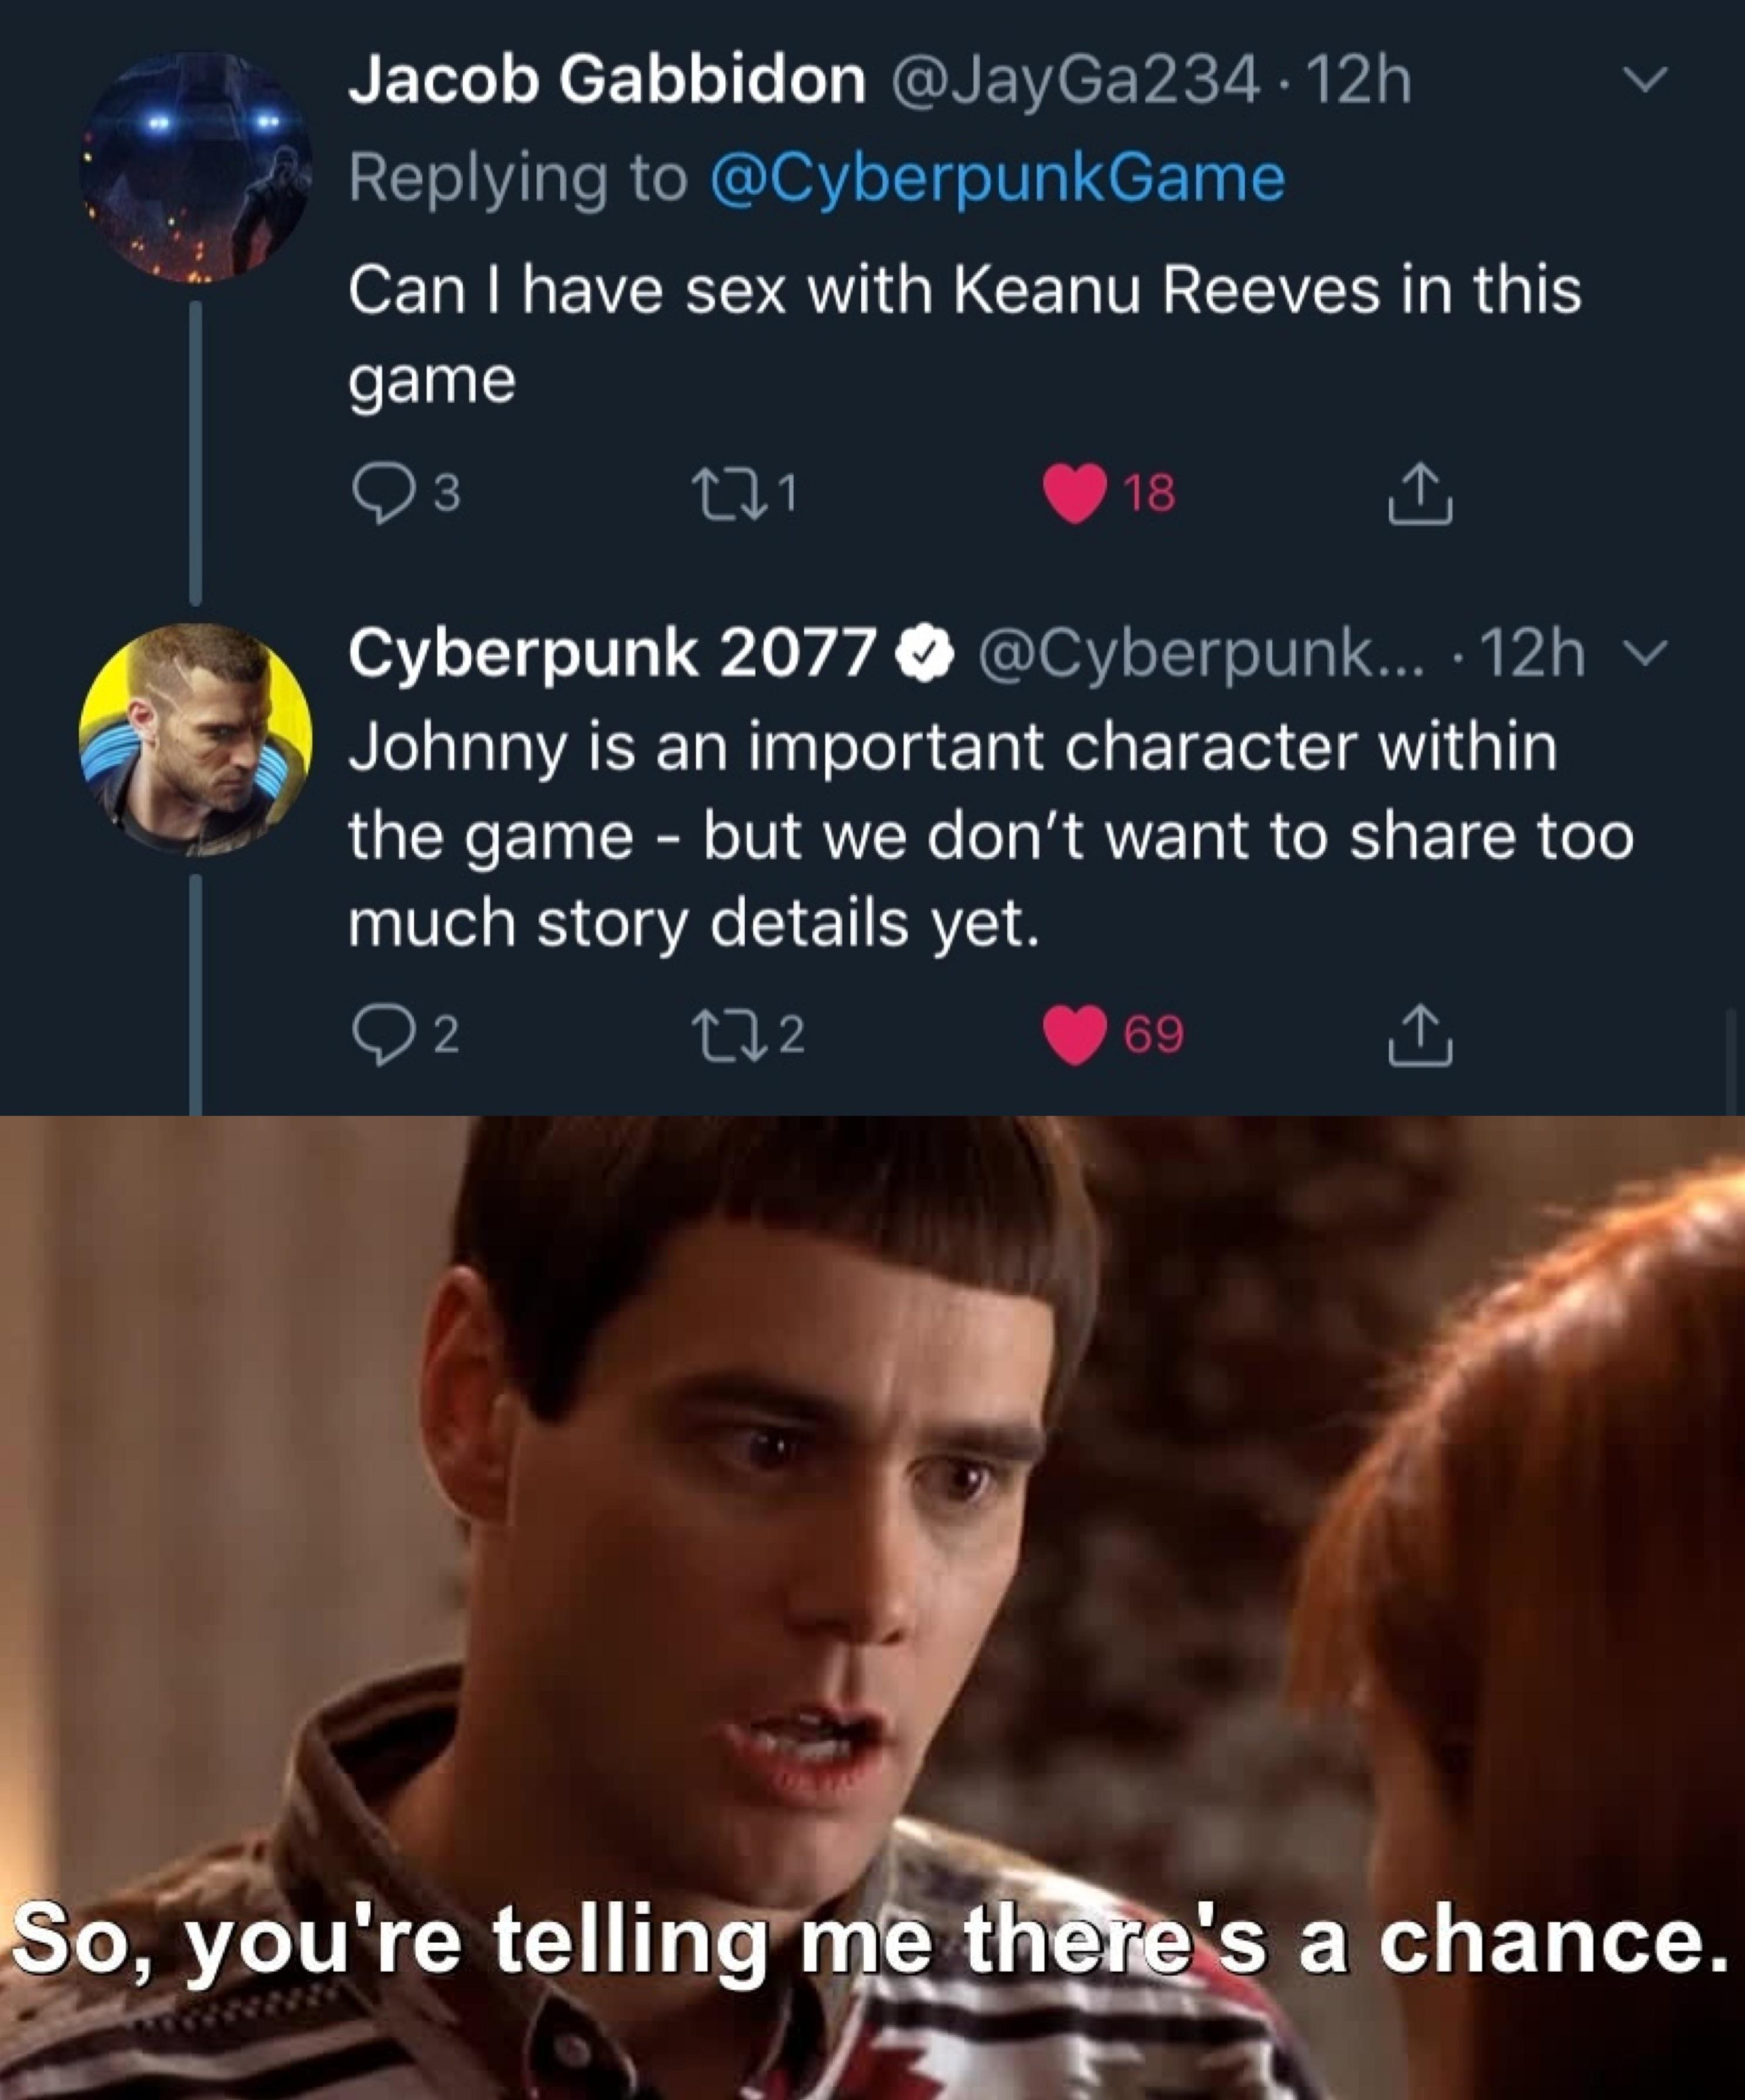 meme re saying there's a chance - V Jacob Gabbidon .12h 21.12h. Can I have sex with Keanu Reeves in this game Q3 21 18 1 Cyberpunk 2077 .... 12h Johnny is an important character within the game but we don't want to too much story details yet. 02 612 69 1 